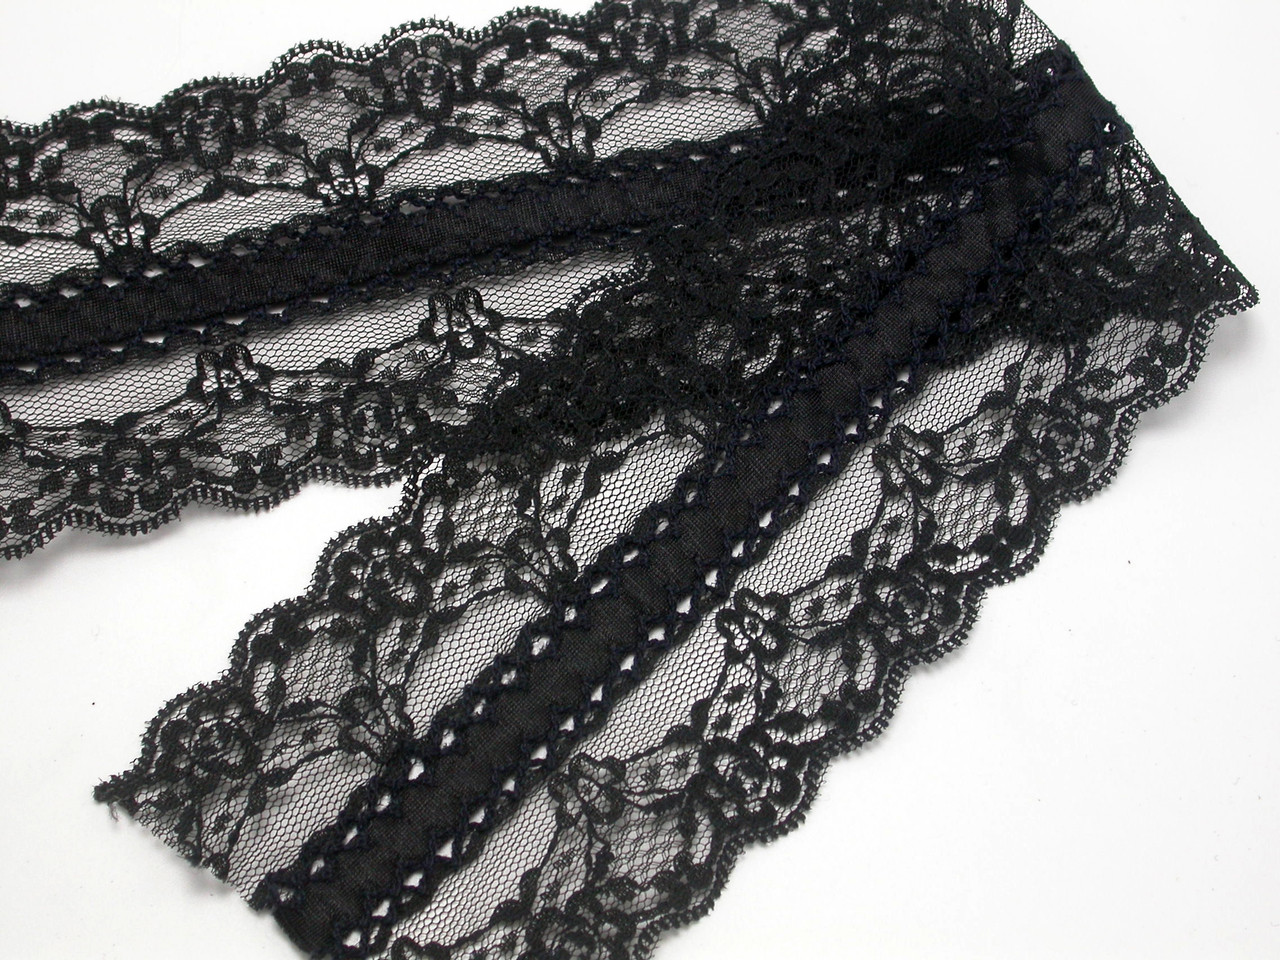 Galloon Lace 3 1/8 (79mm) Black with Ribbon Center Priced Per Yard -  Patchwork Panda Trims